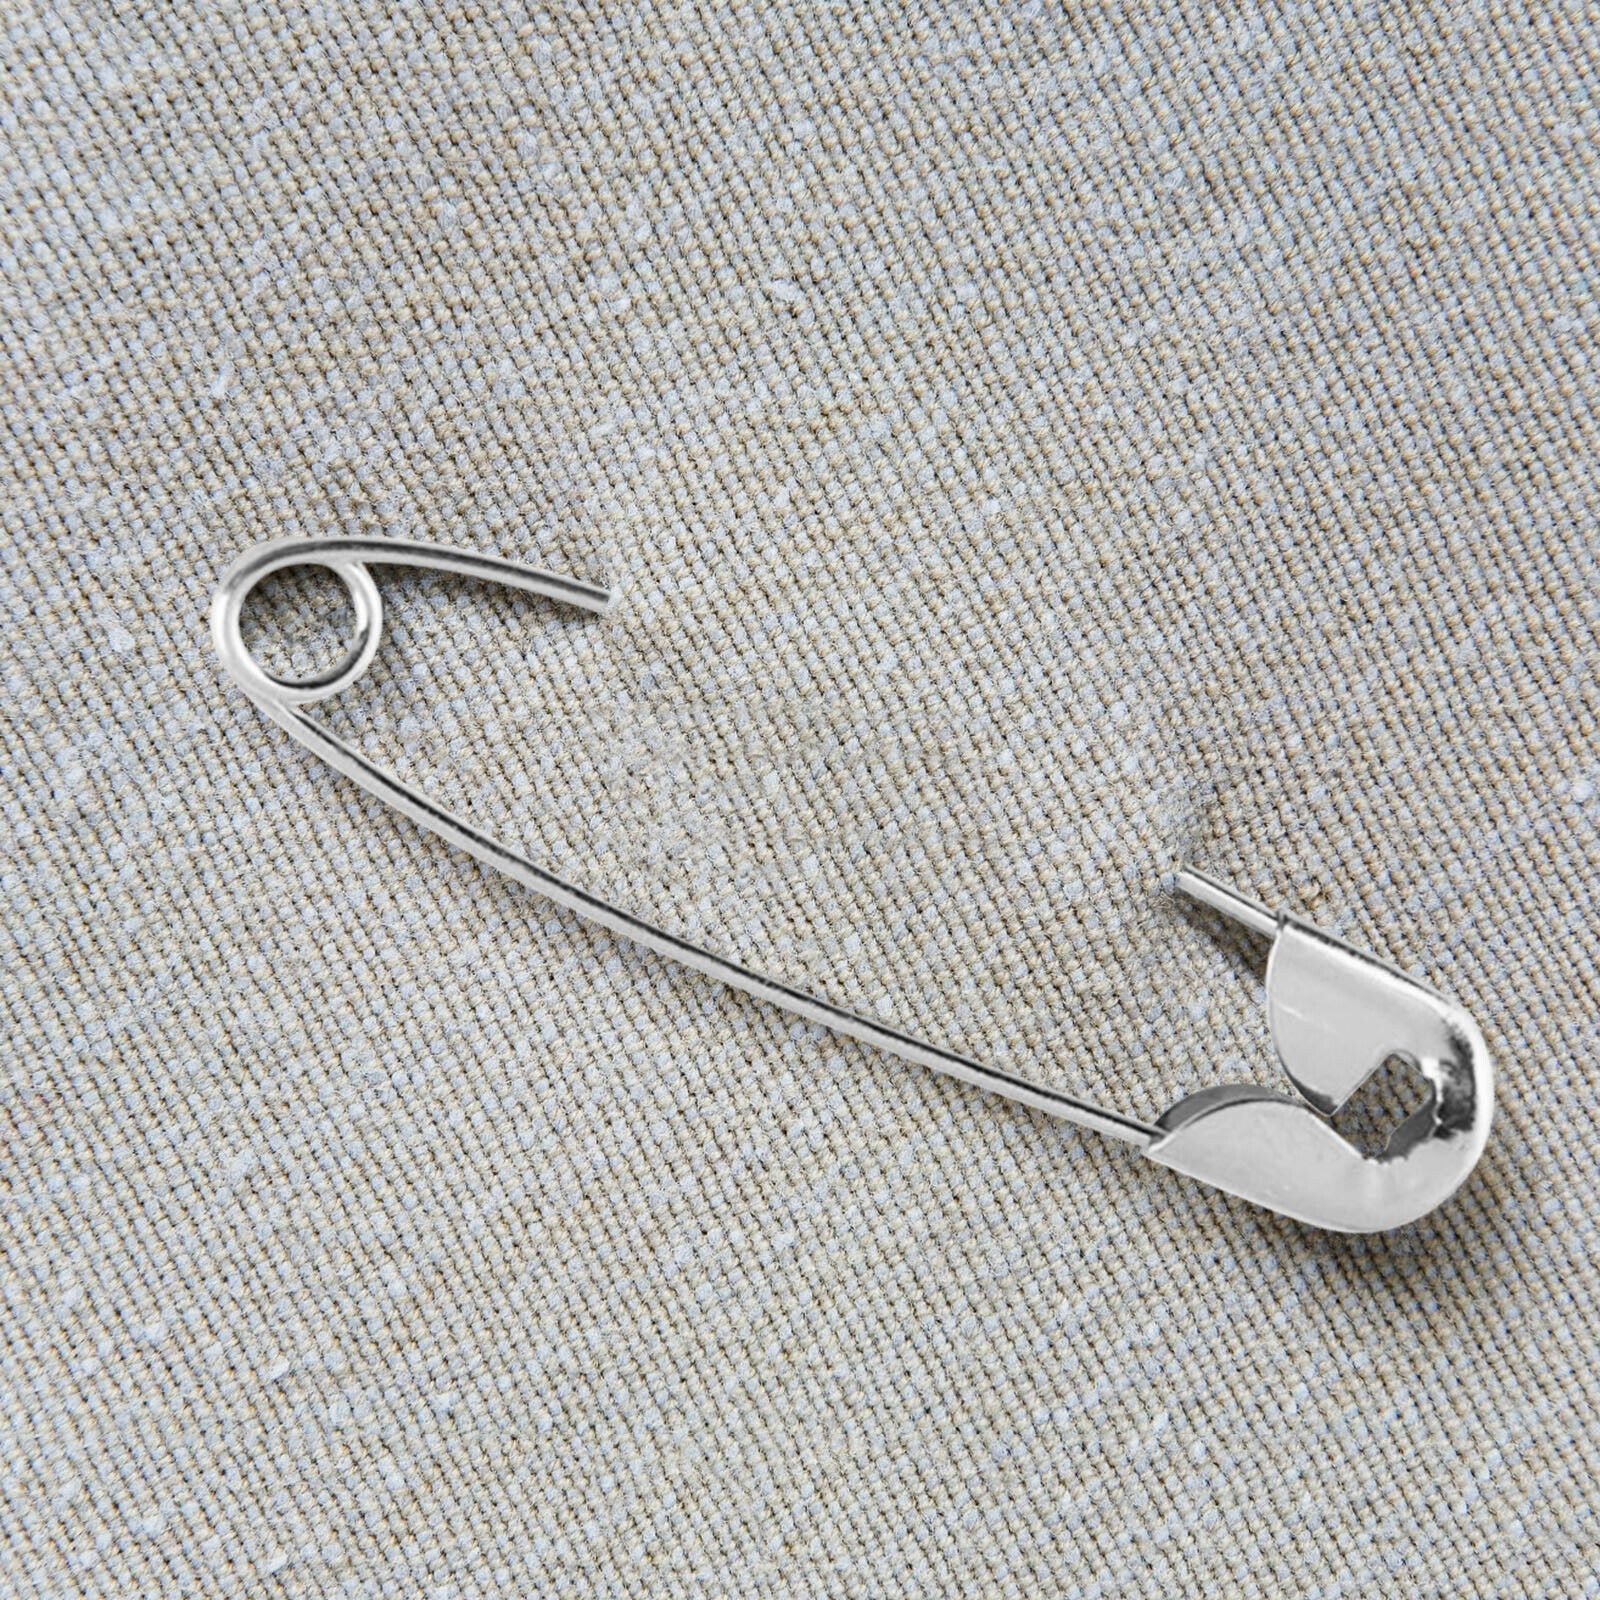 460Pcs Stainless Steel Safety Pins Steel Duty Heavy Large Size 19-54mm Set